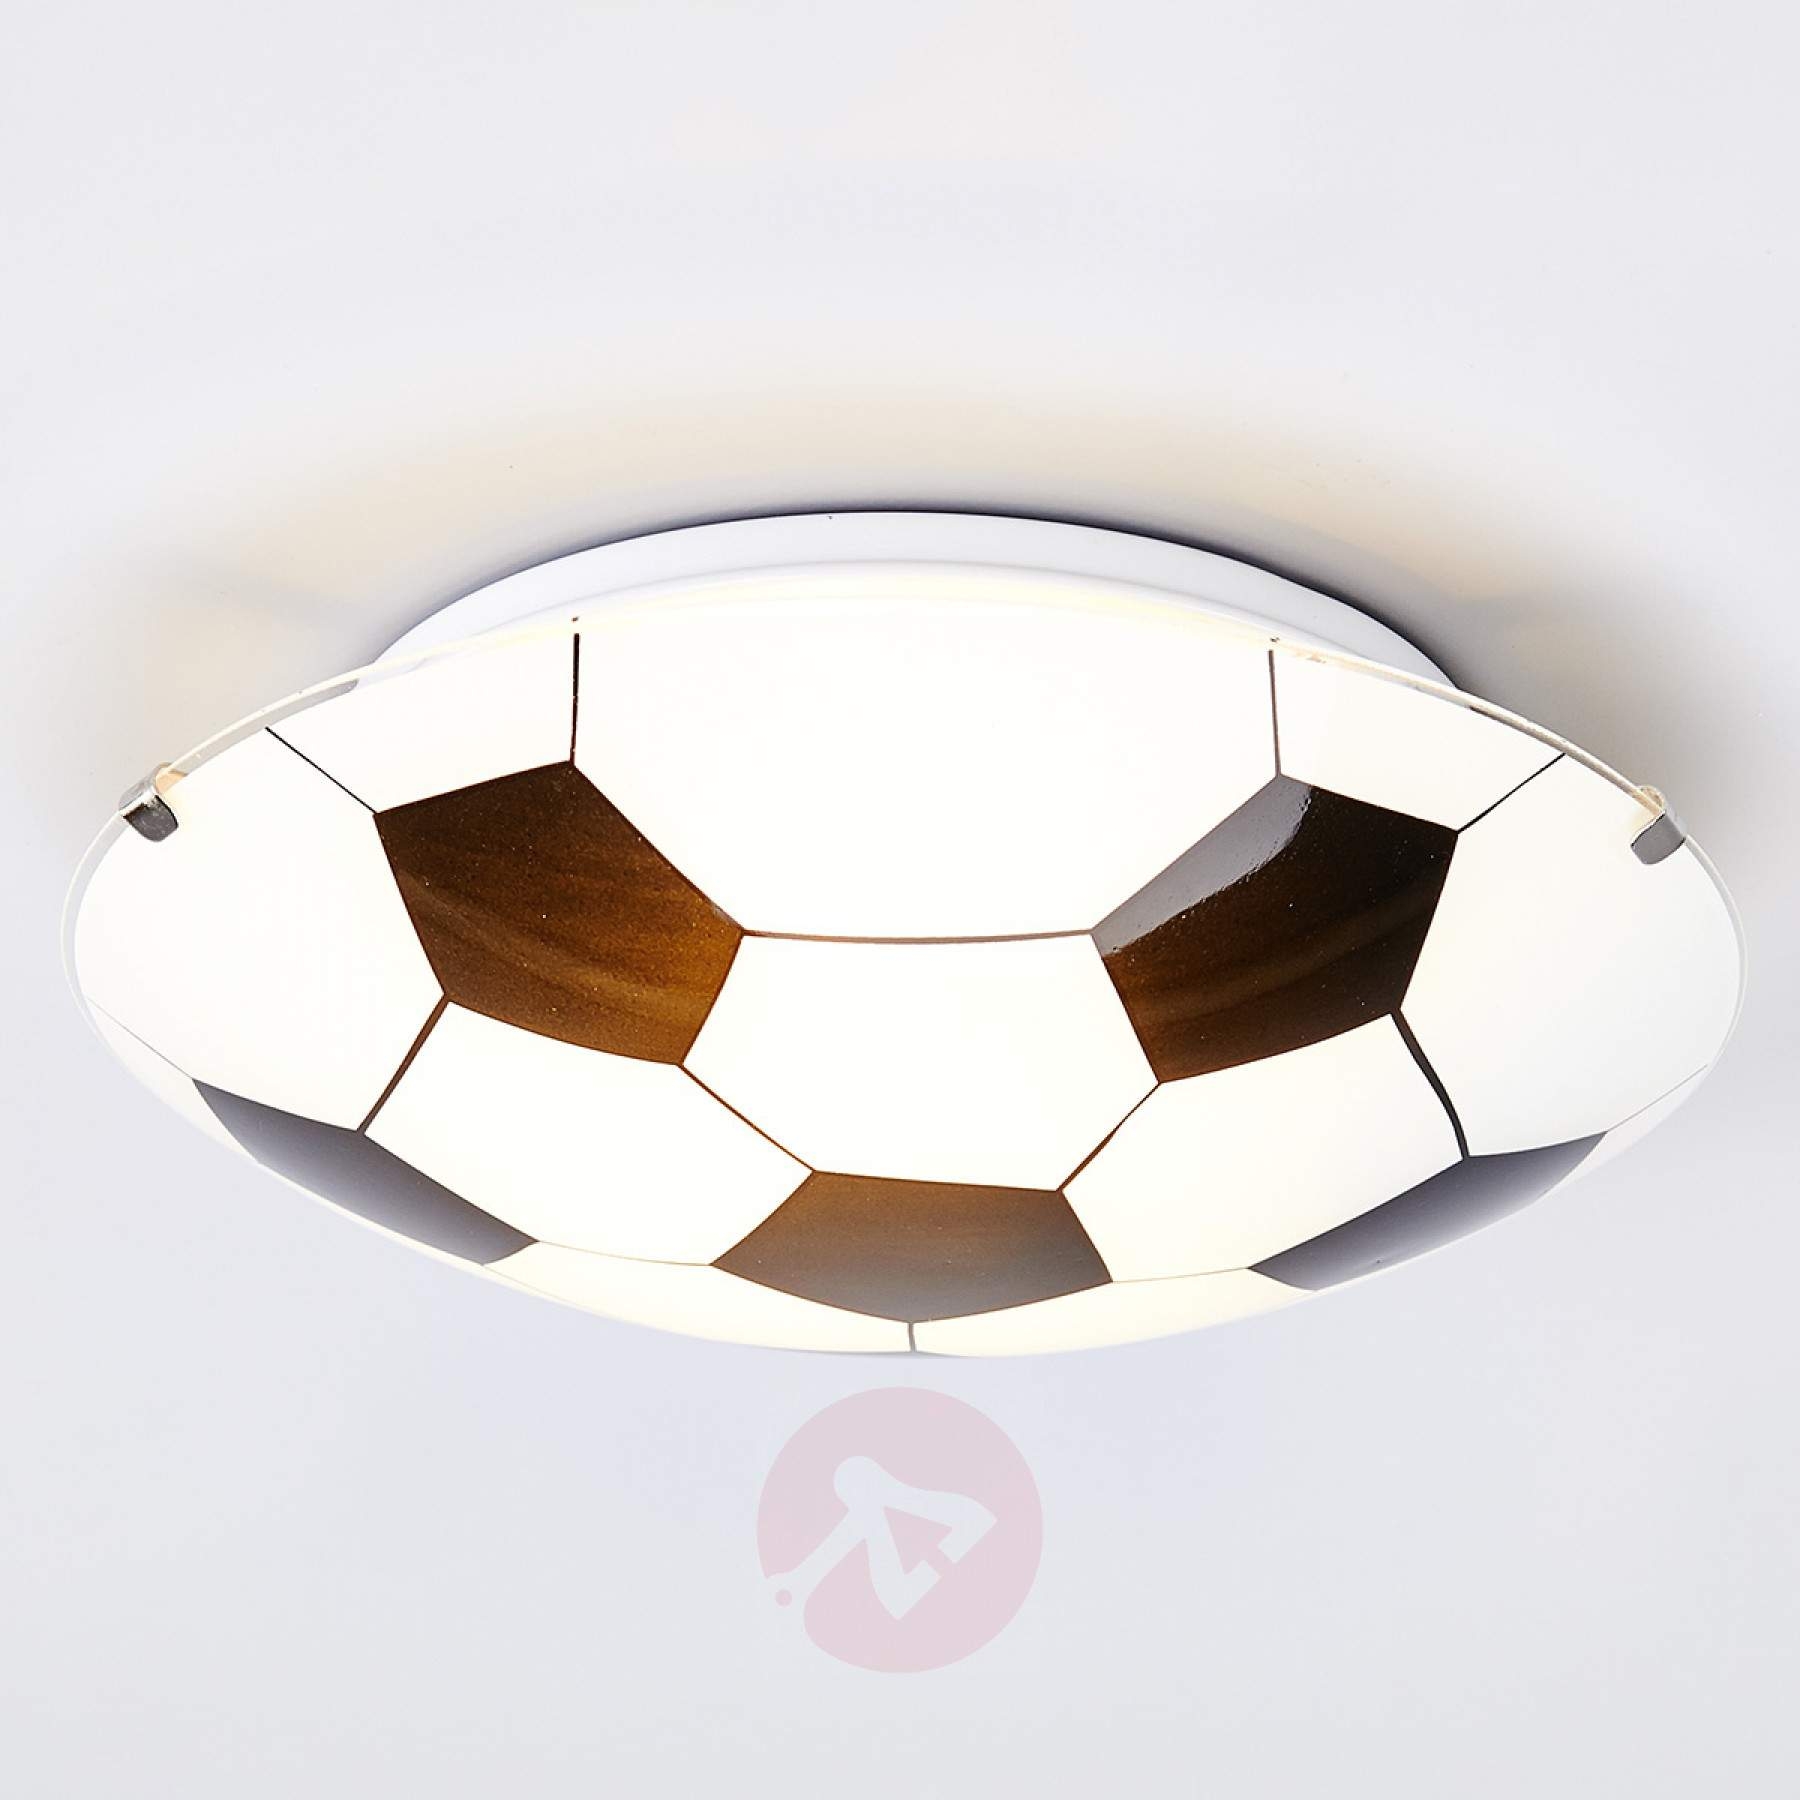 Permalink to Football Ceiling Light Fixtures